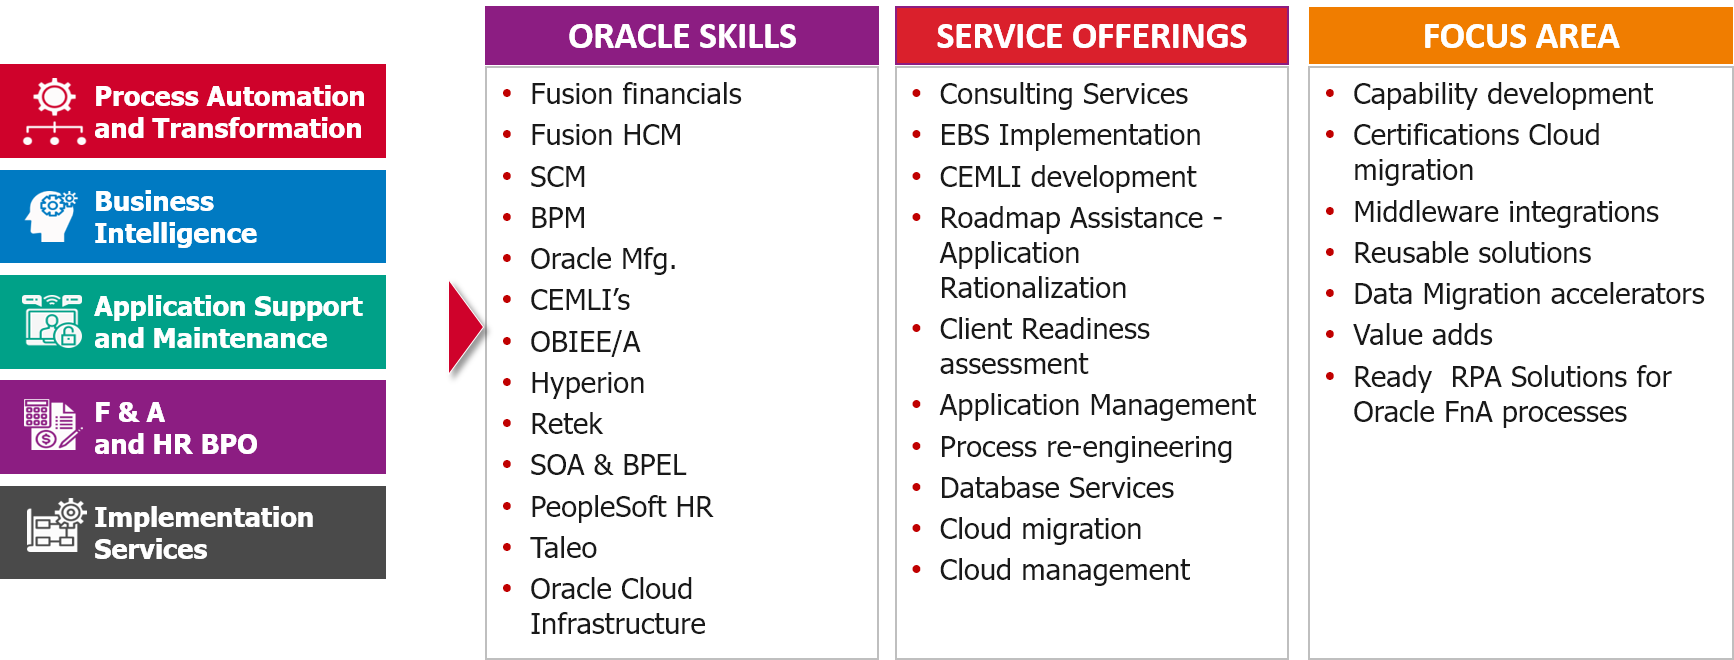 Oracle skills, service offerings and focus areas